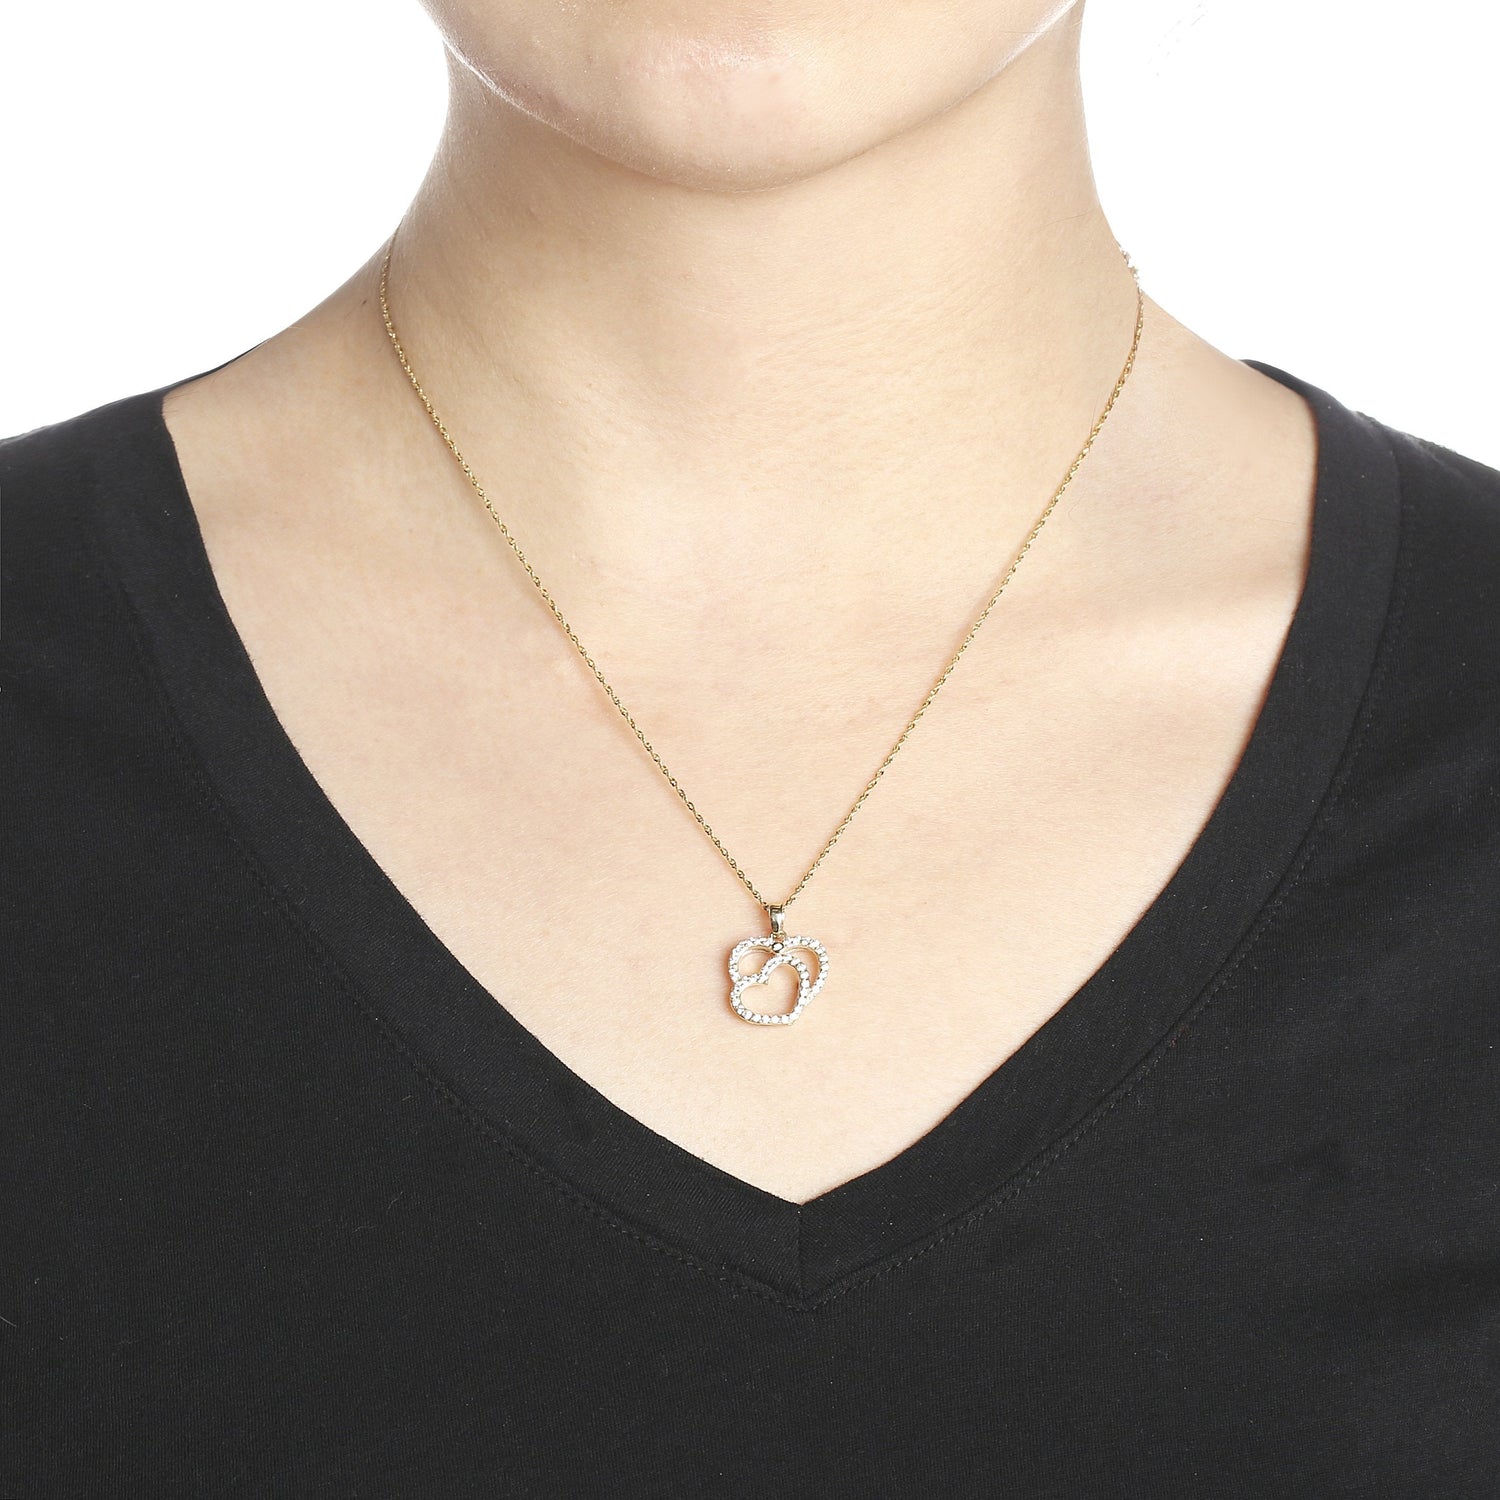 10k Yellow Gold Double Heart Shaped Cubic Zirconia Pendant Necklace